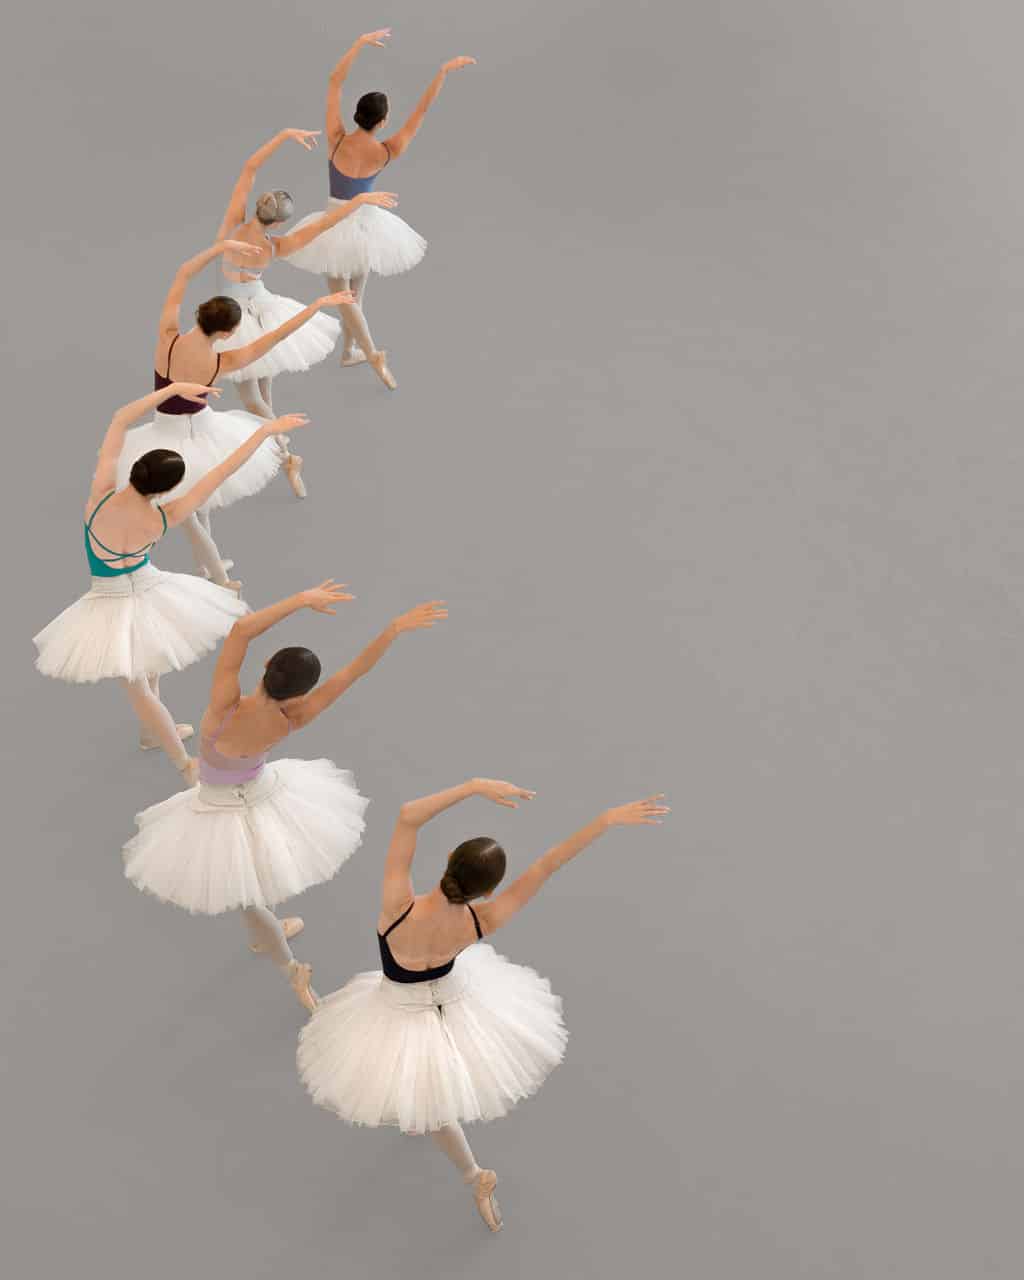 Ballet Dancers from the English National Ballet